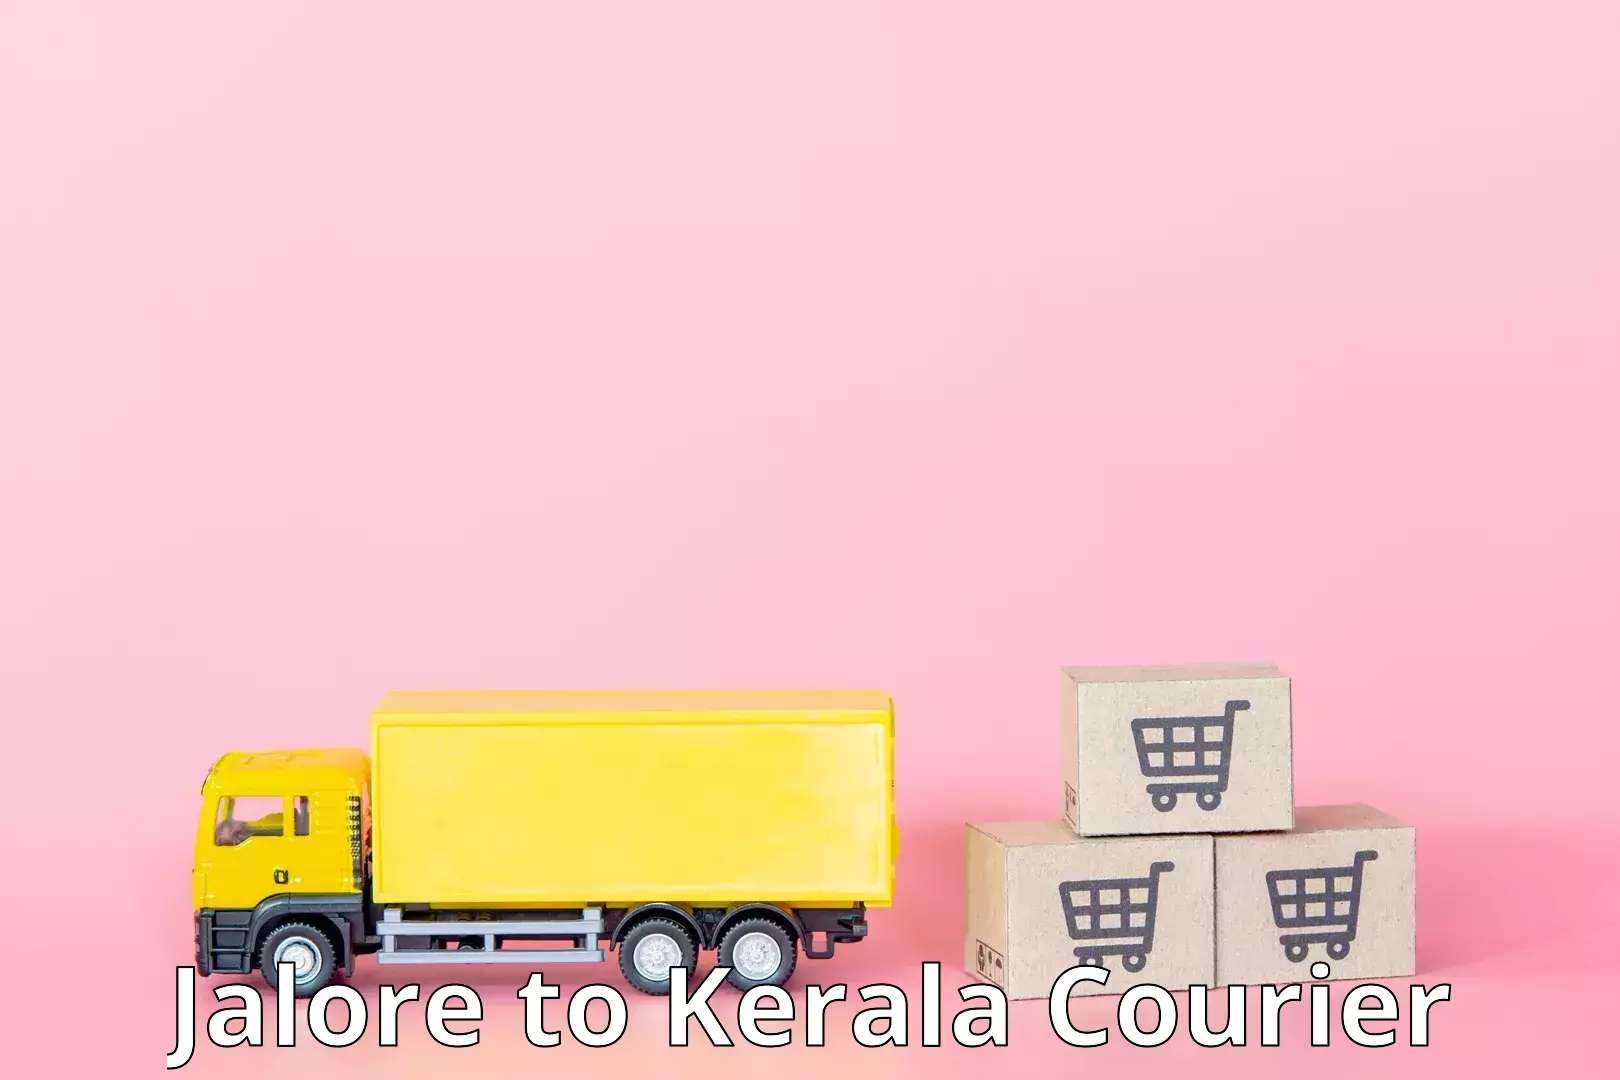 Courier service innovation Jalore to Anjumoorthy